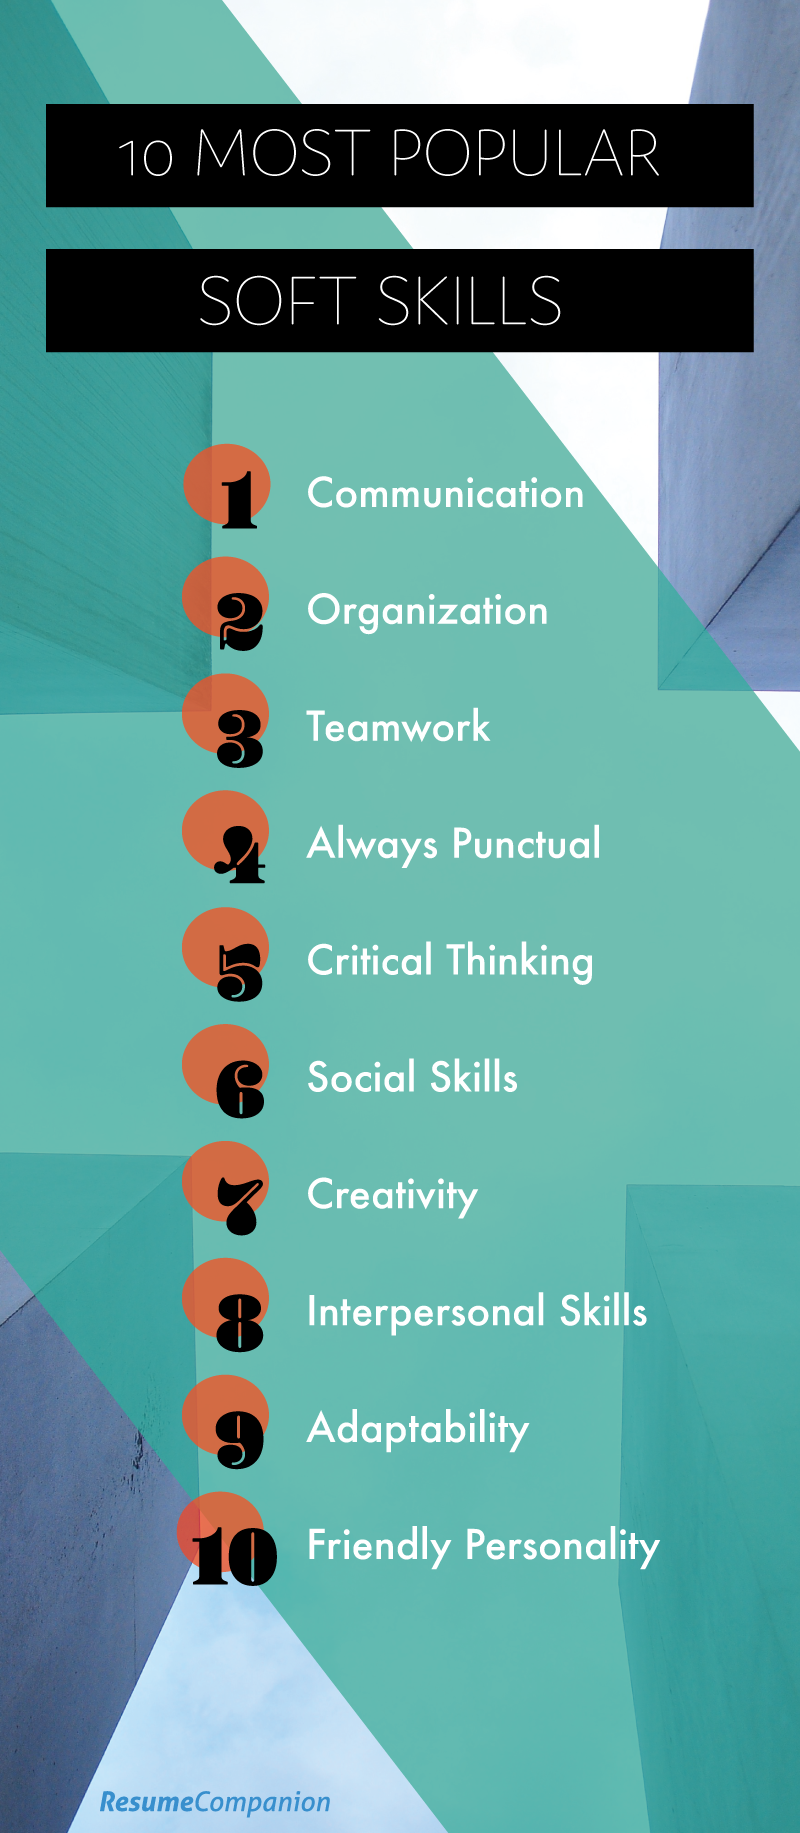 top 10 soft skills for a resume employers look for infographic Resume